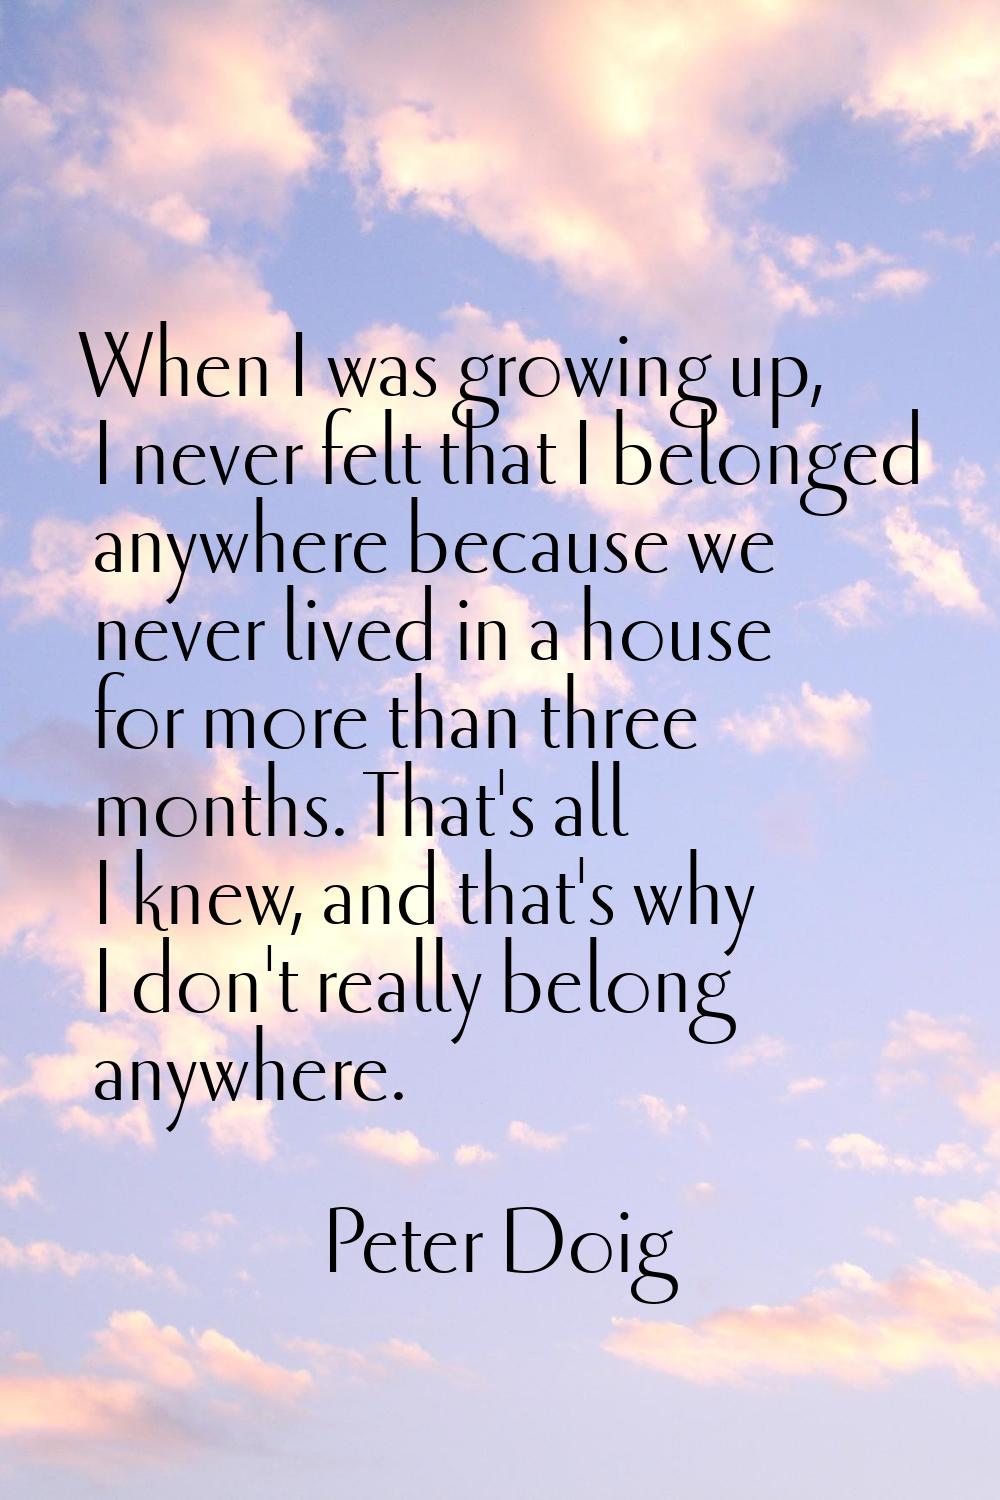 When I was growing up, I never felt that I belonged anywhere because we never lived in a house for 